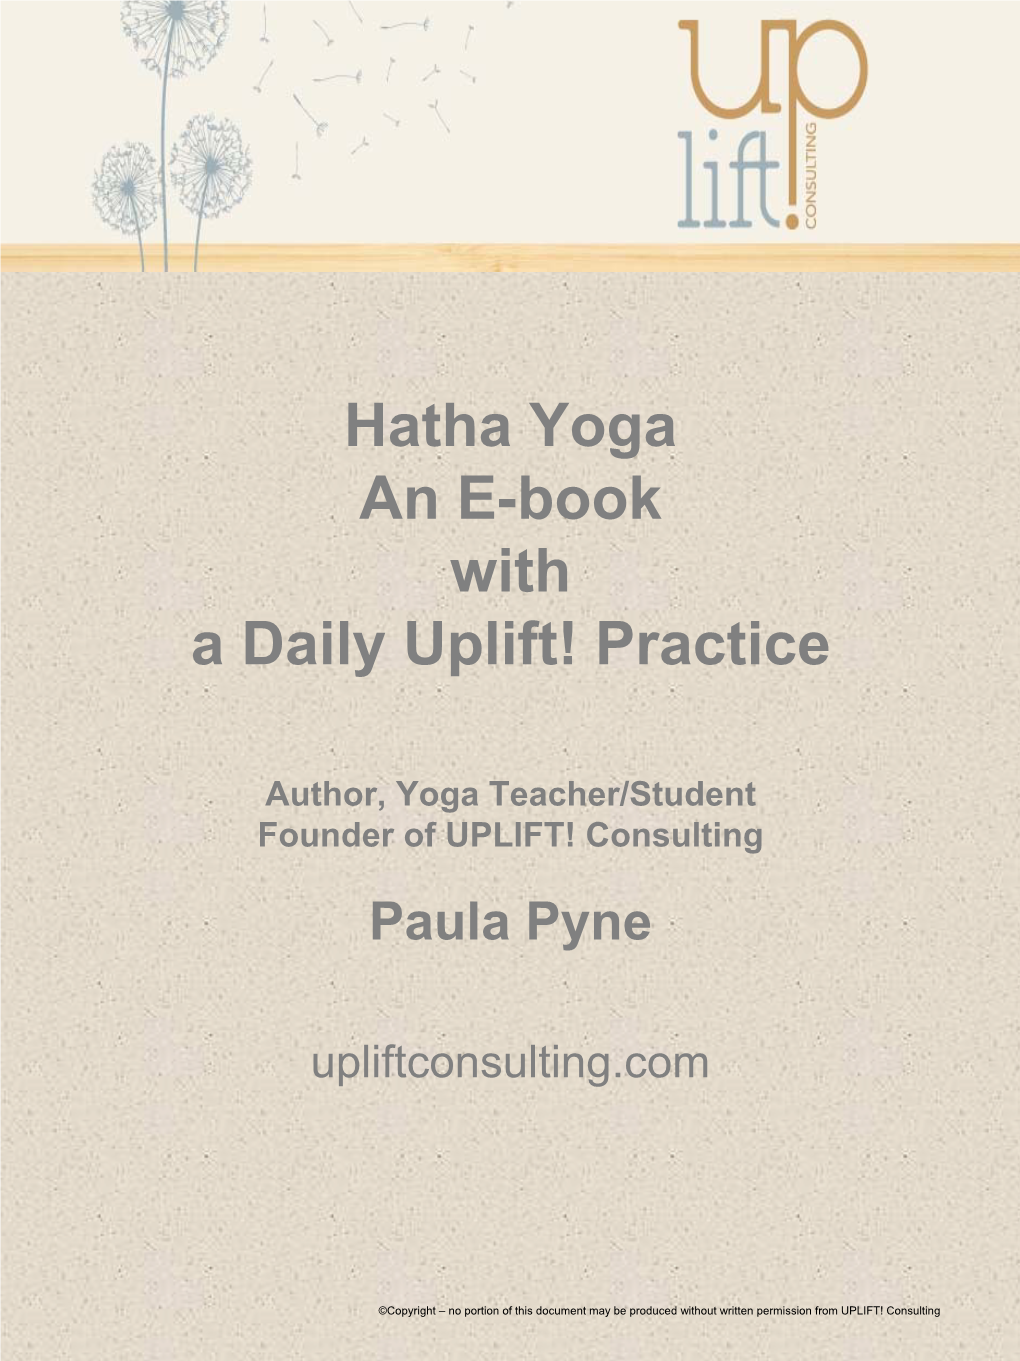 Hatha Yoga an E-Book with a Daily Uplift! Practice